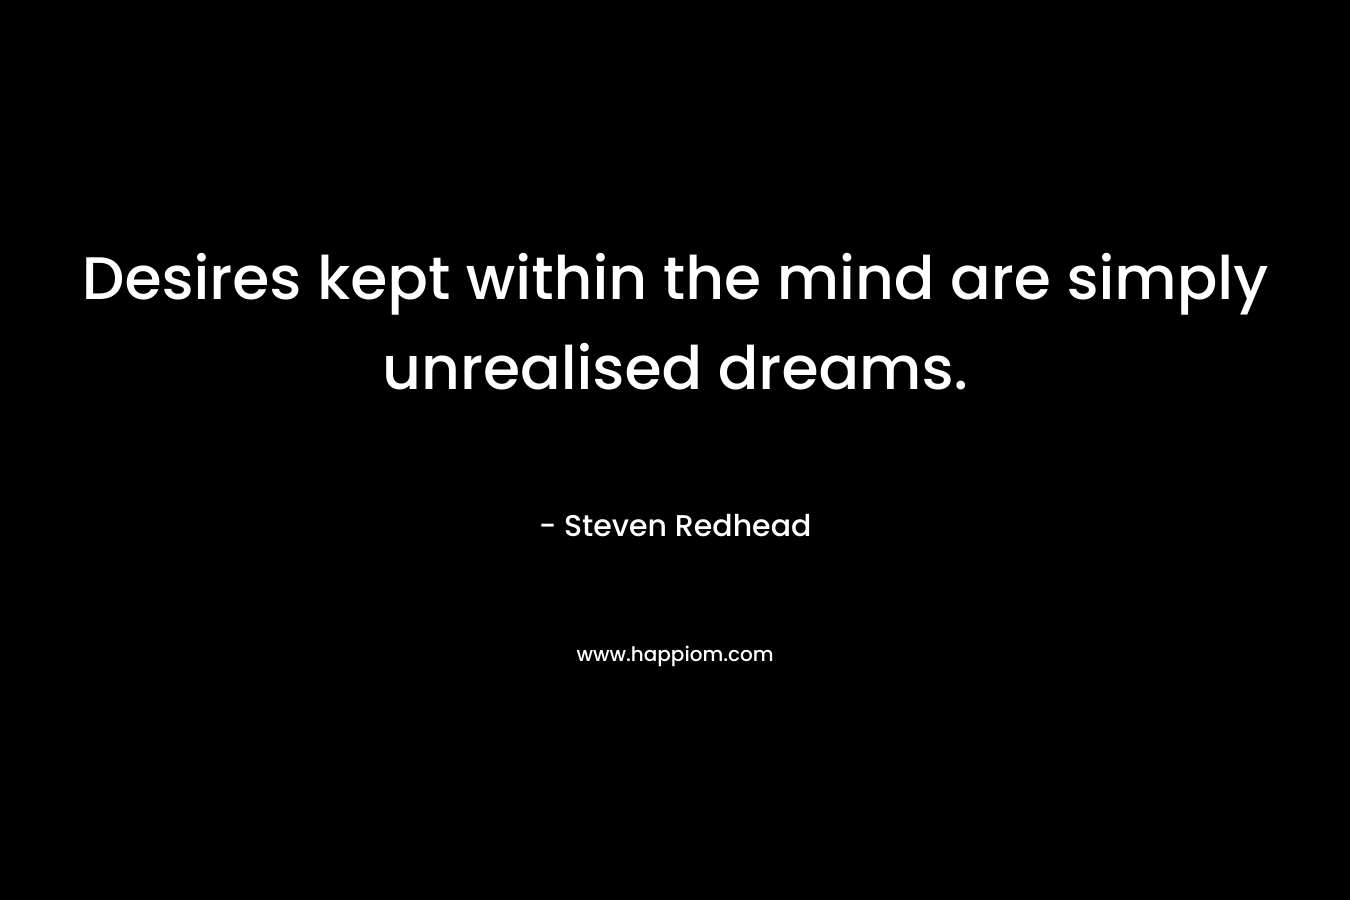 Desires kept within the mind are simply unrealised dreams.